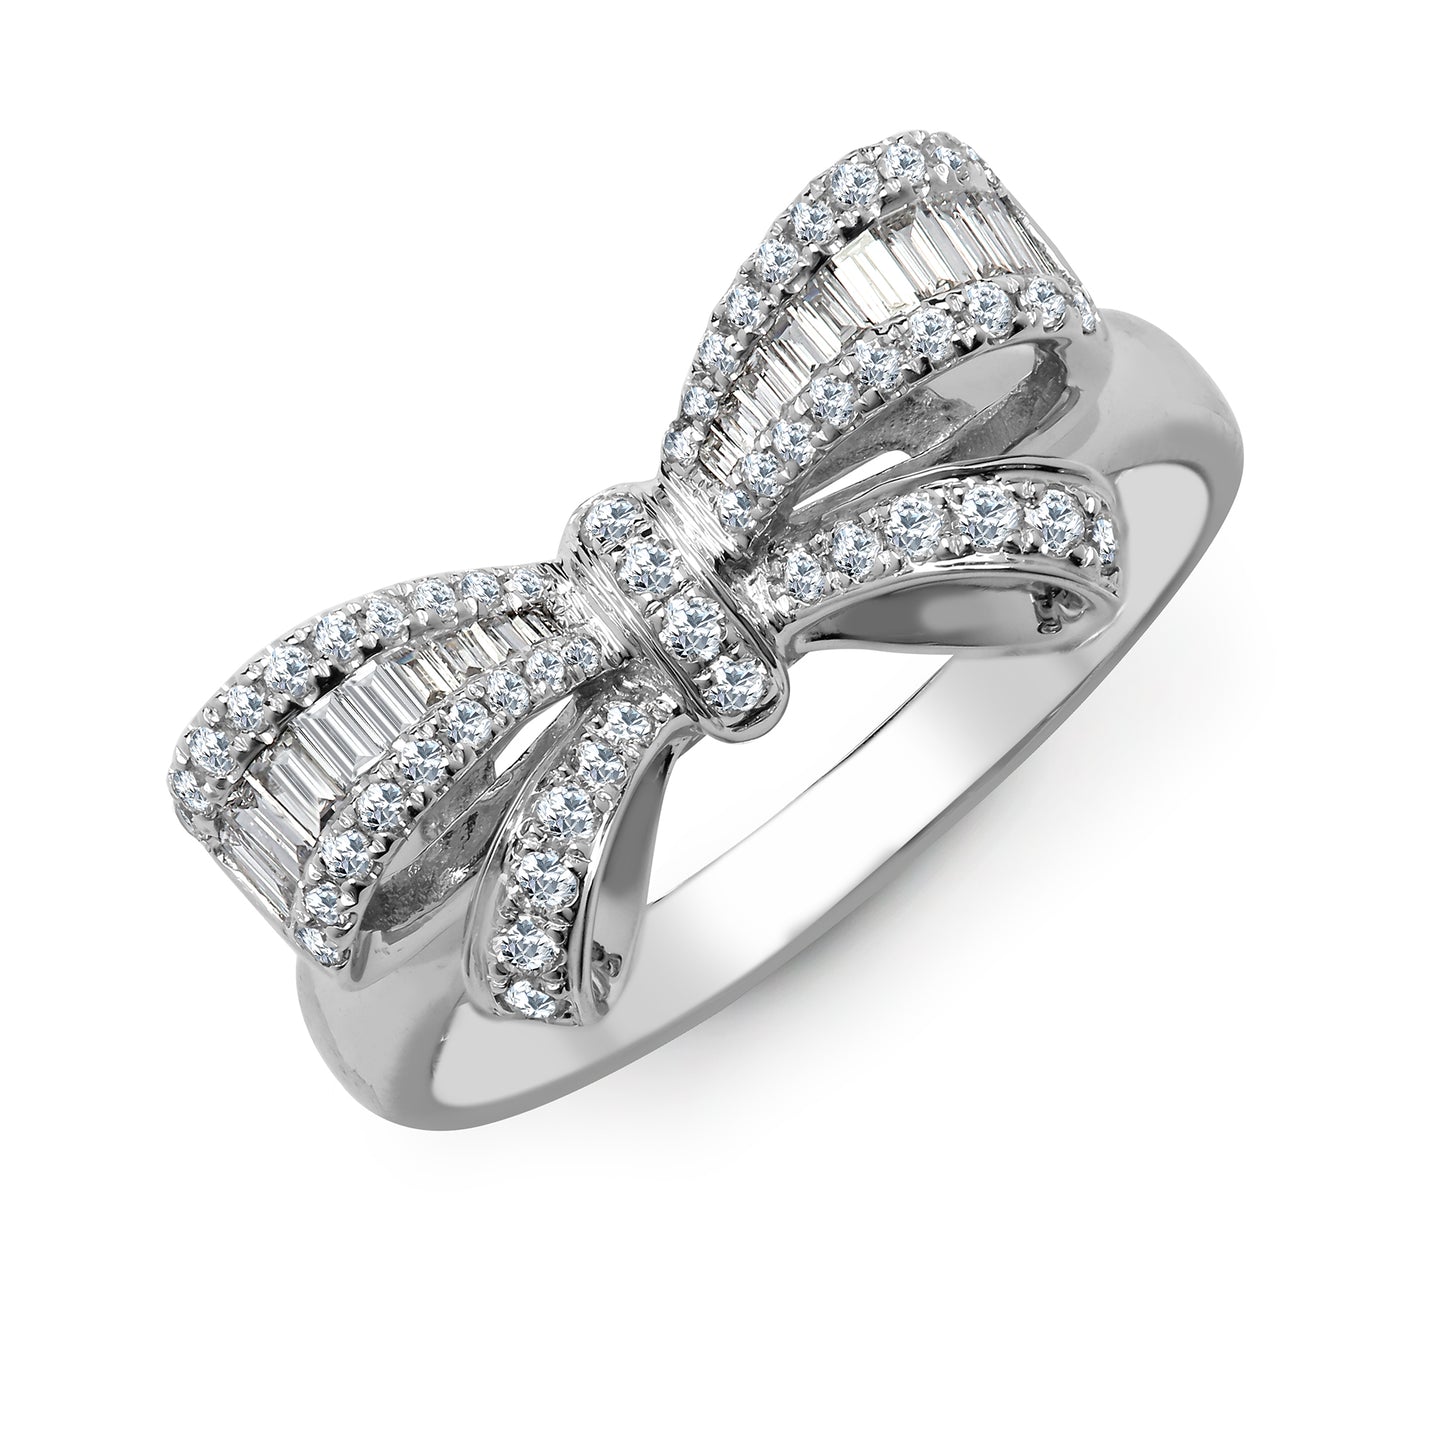 18ct White Gold 0.46ct Diamond R.B.C & Baguette Bow Ring  by